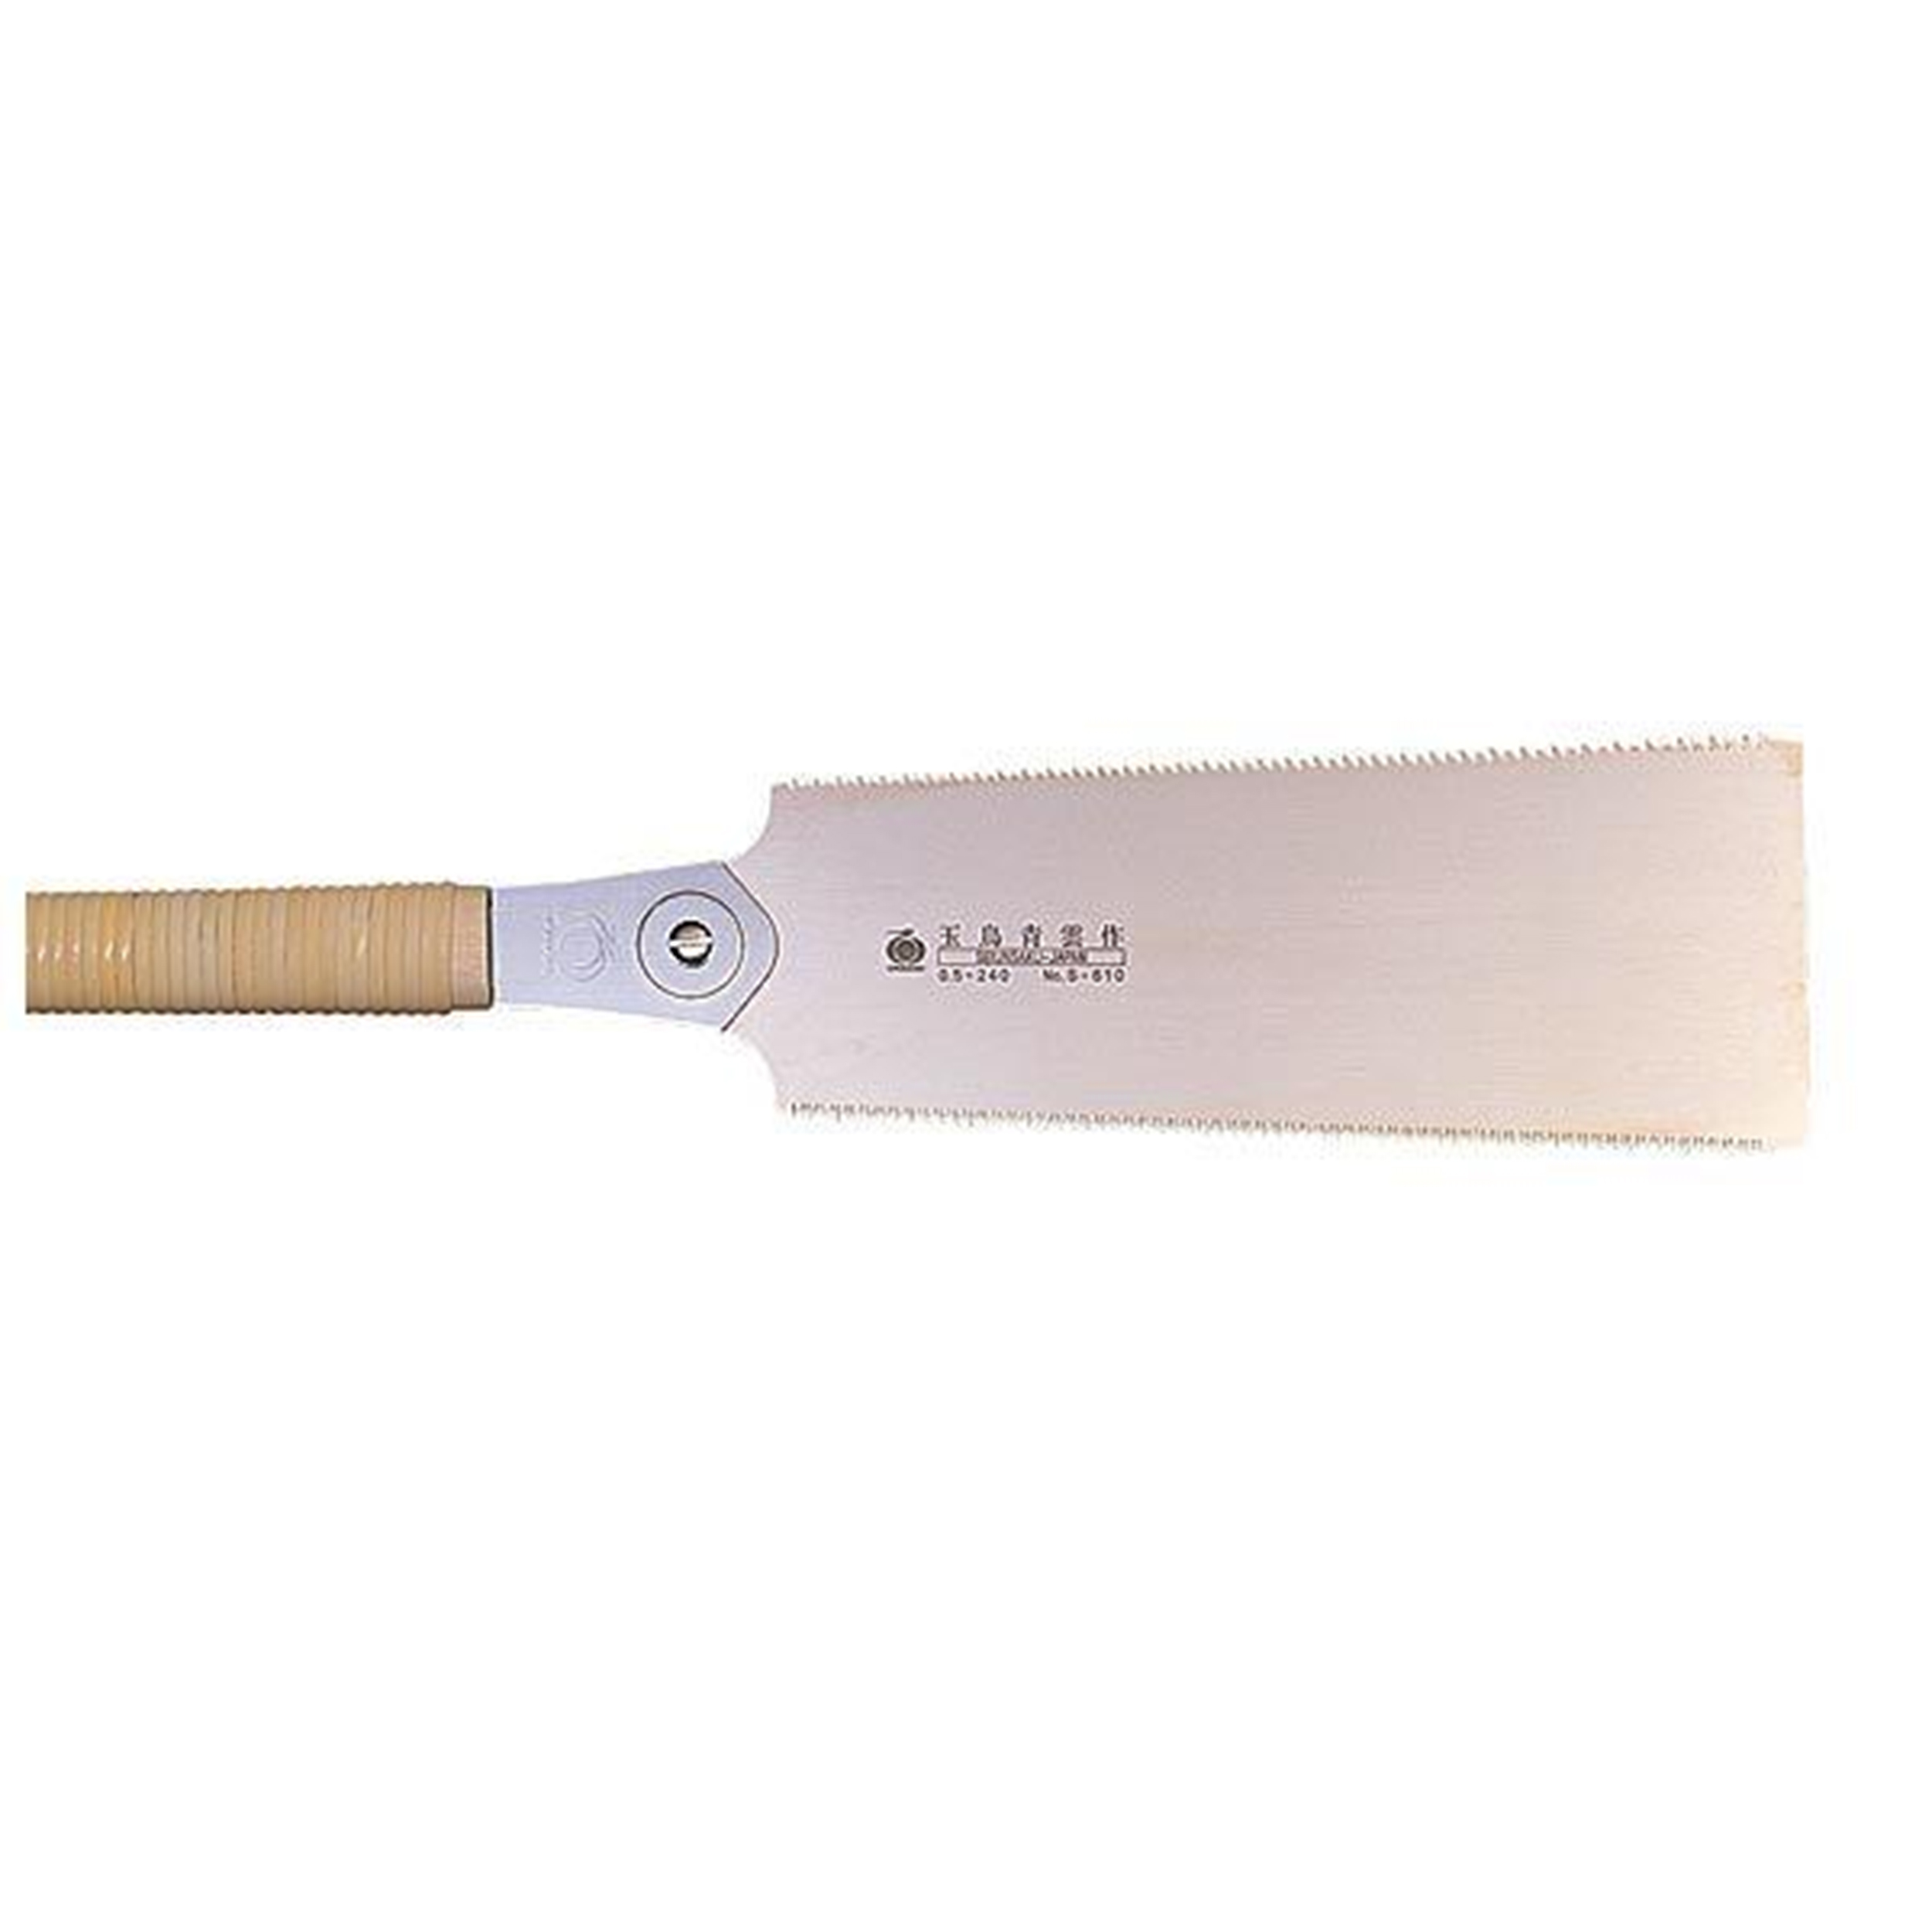 Ryoba Saw 240mm No. 610 With Replaceable Blade - Gyokucho